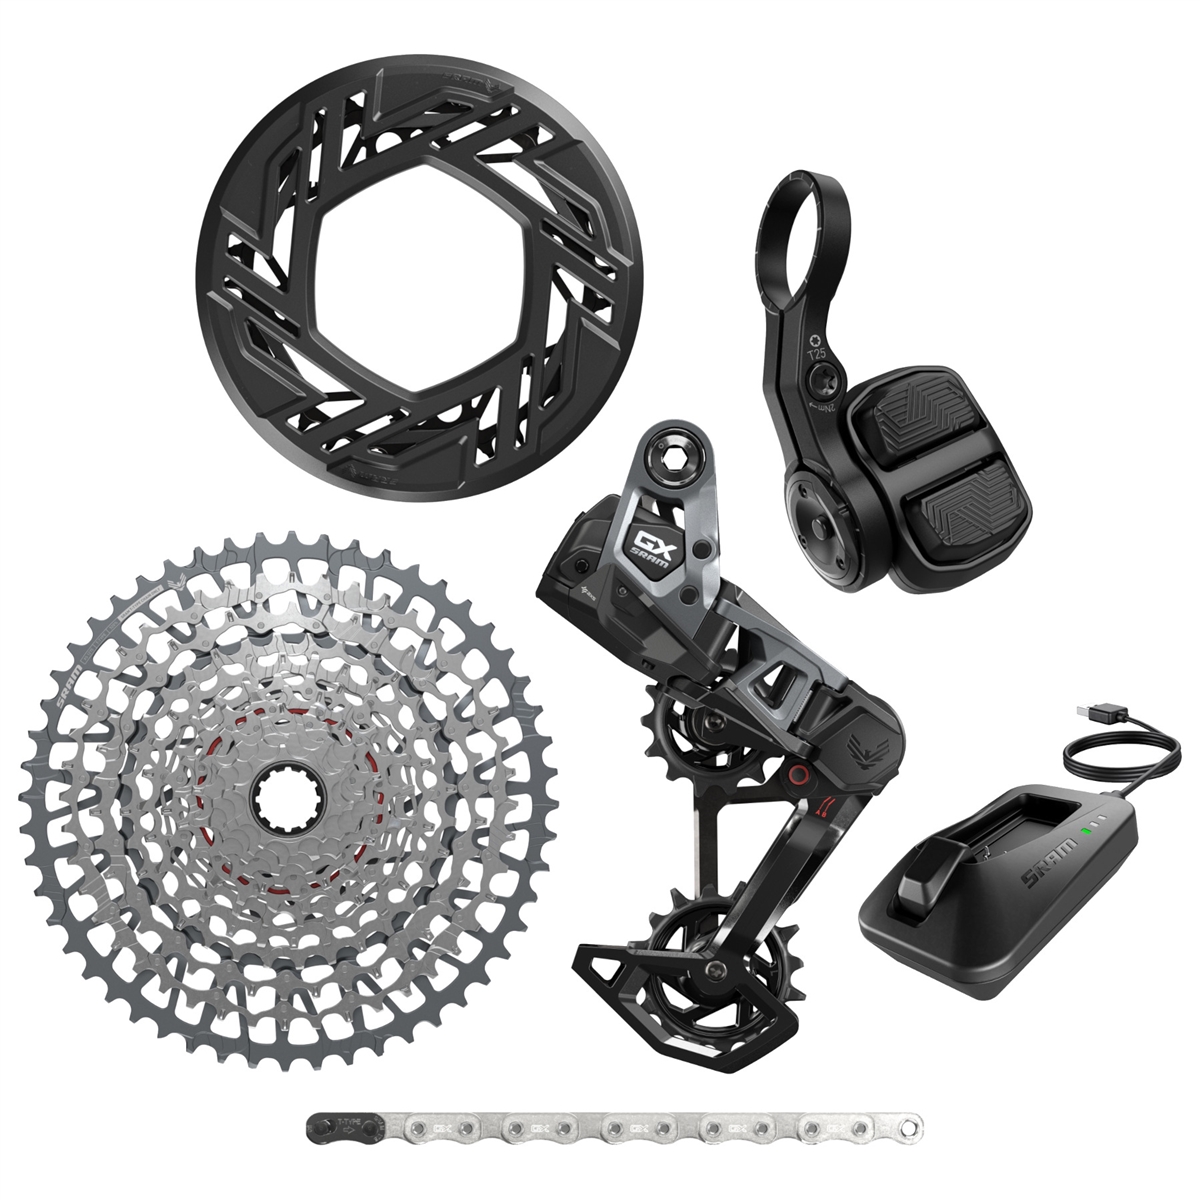 Gruppo completo ebike GX T-Type Eagle AXS EMTB 104mm 36t 10-52